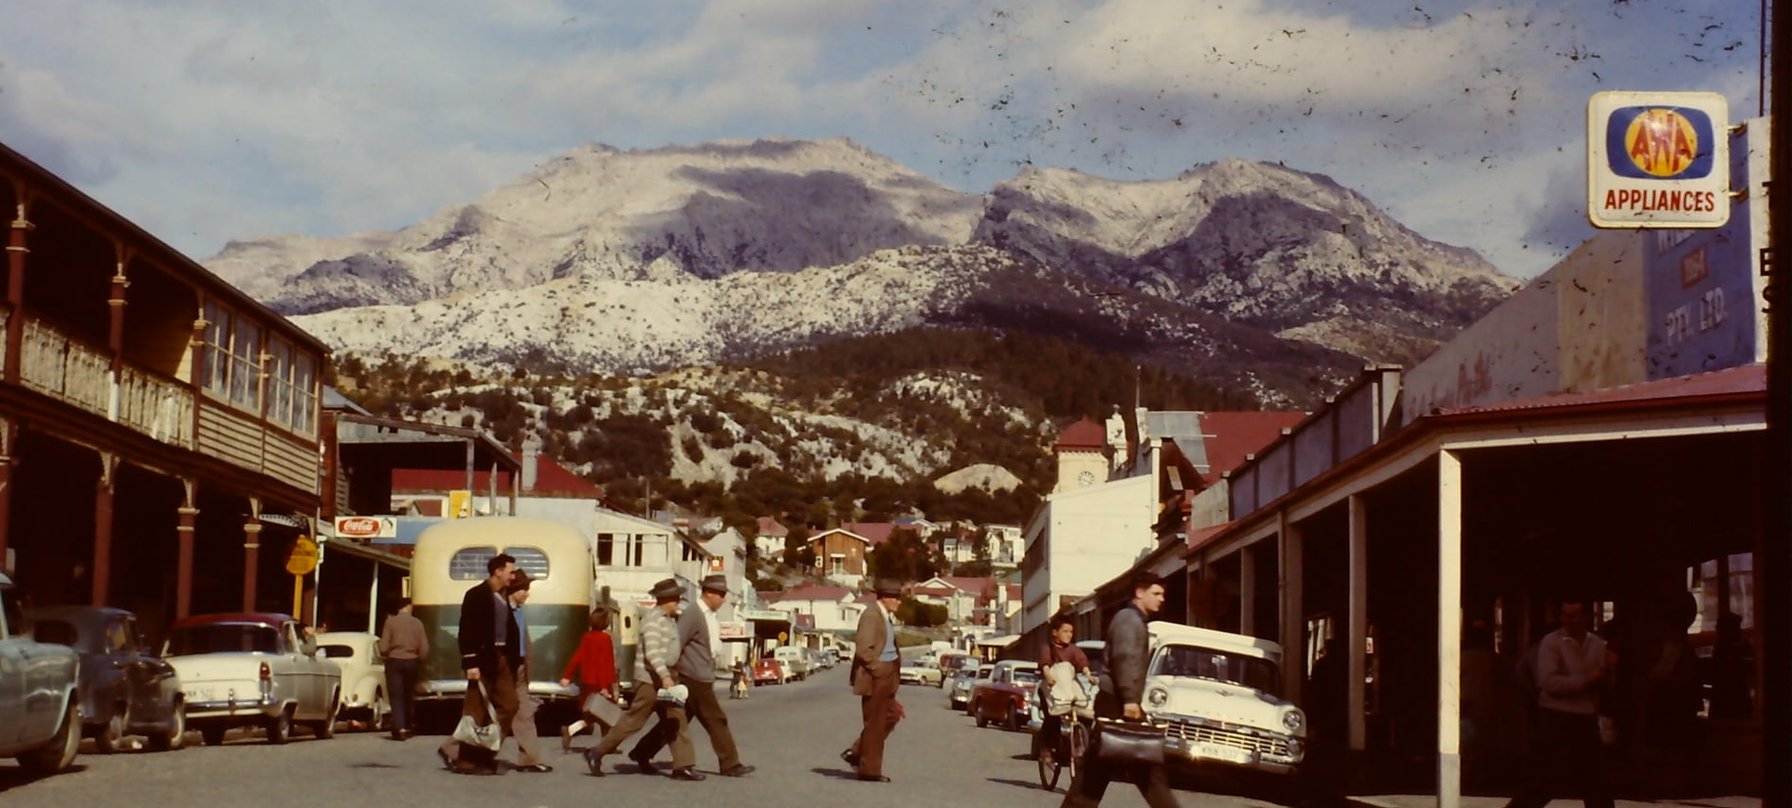 Shift Change. An old photograph of Queenstown's Orr Street. Vintage cars line the sides of the street and people cross the road wearing coats and hats, some carrying brief cases. In the background stands a snowy Mount Lyell. Credit Adrian Morgan.